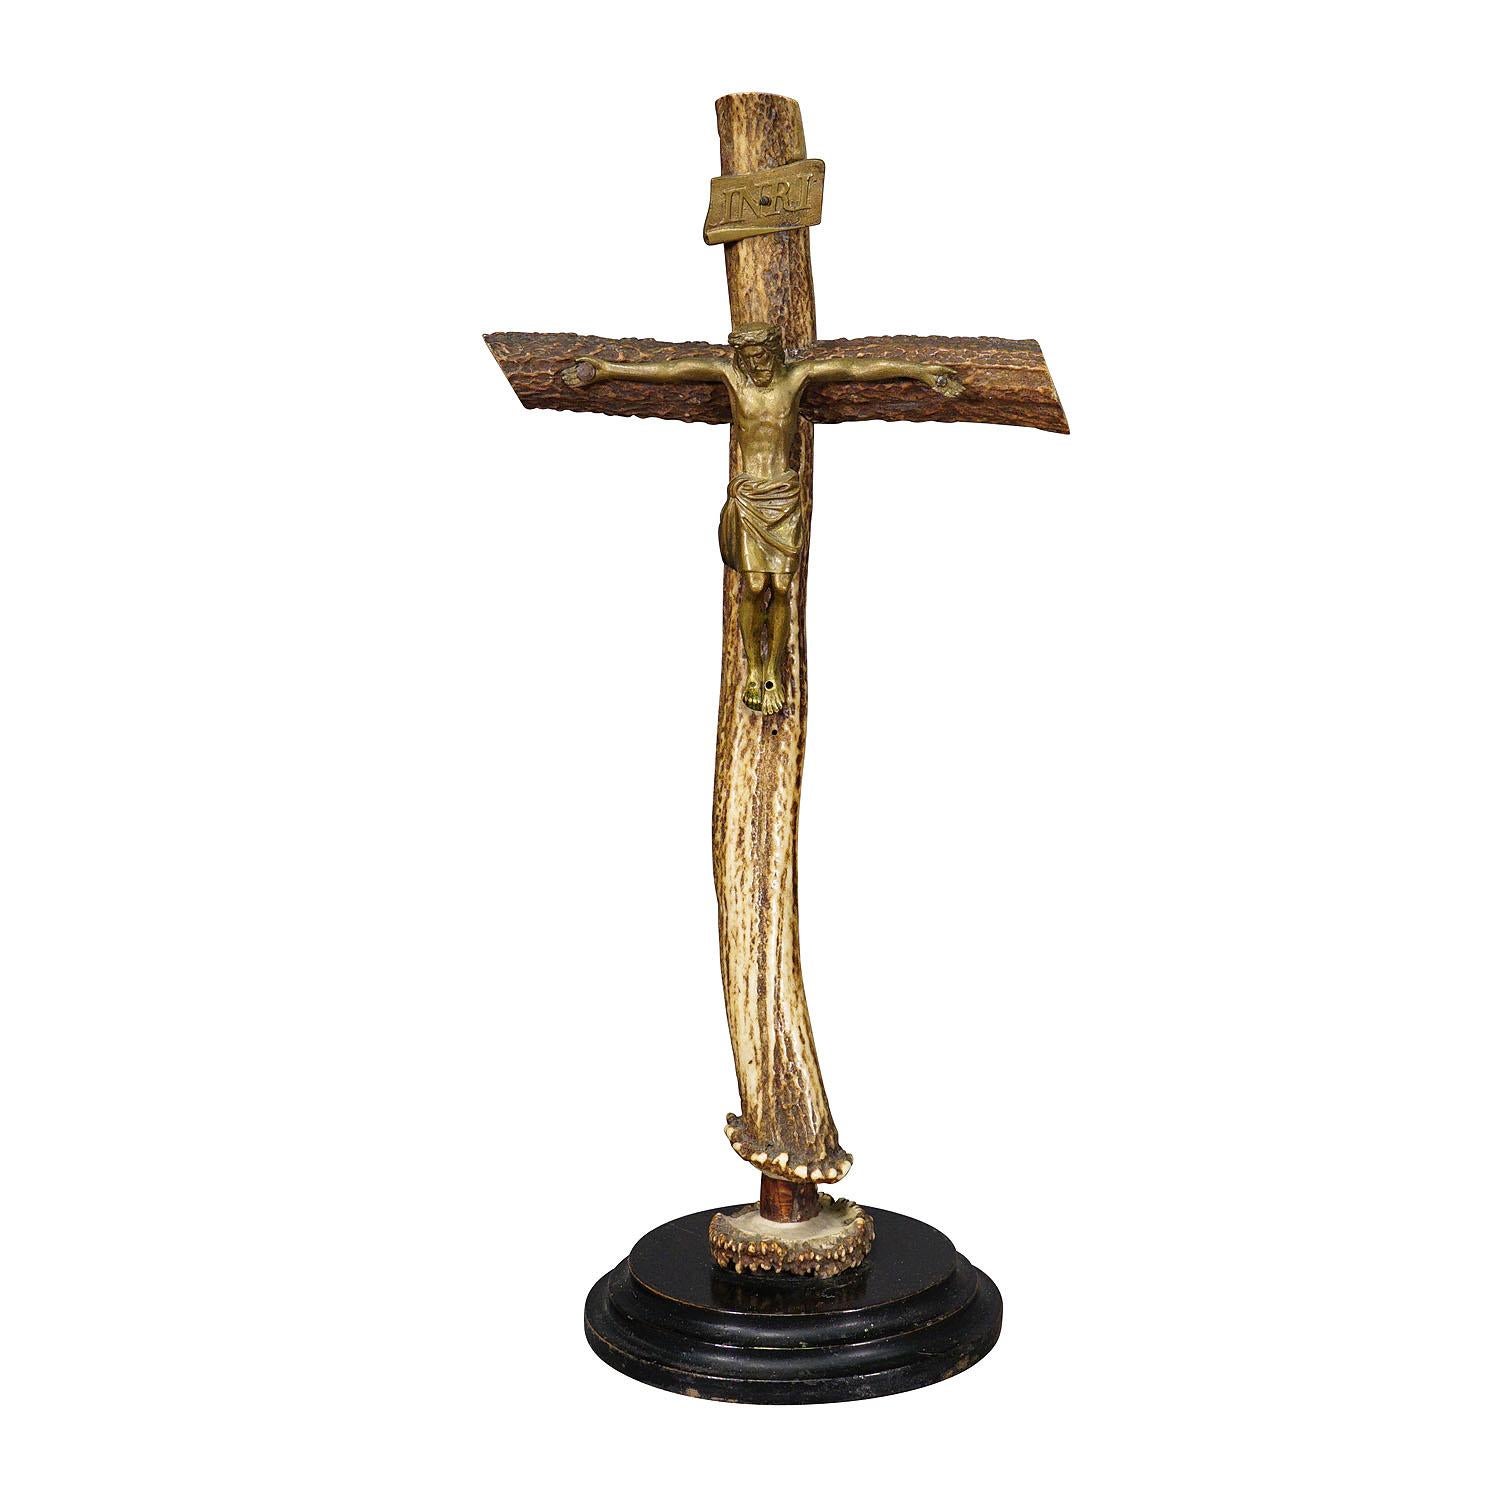 Vintage Crucifix made of Deer Antlers

A vintage crucifix with a metal sculpture of the suffering Christ on the cross. The cross is made of two deer antler pieces which are mounted on a turned wooden base.

artfour is an owner-managed trading